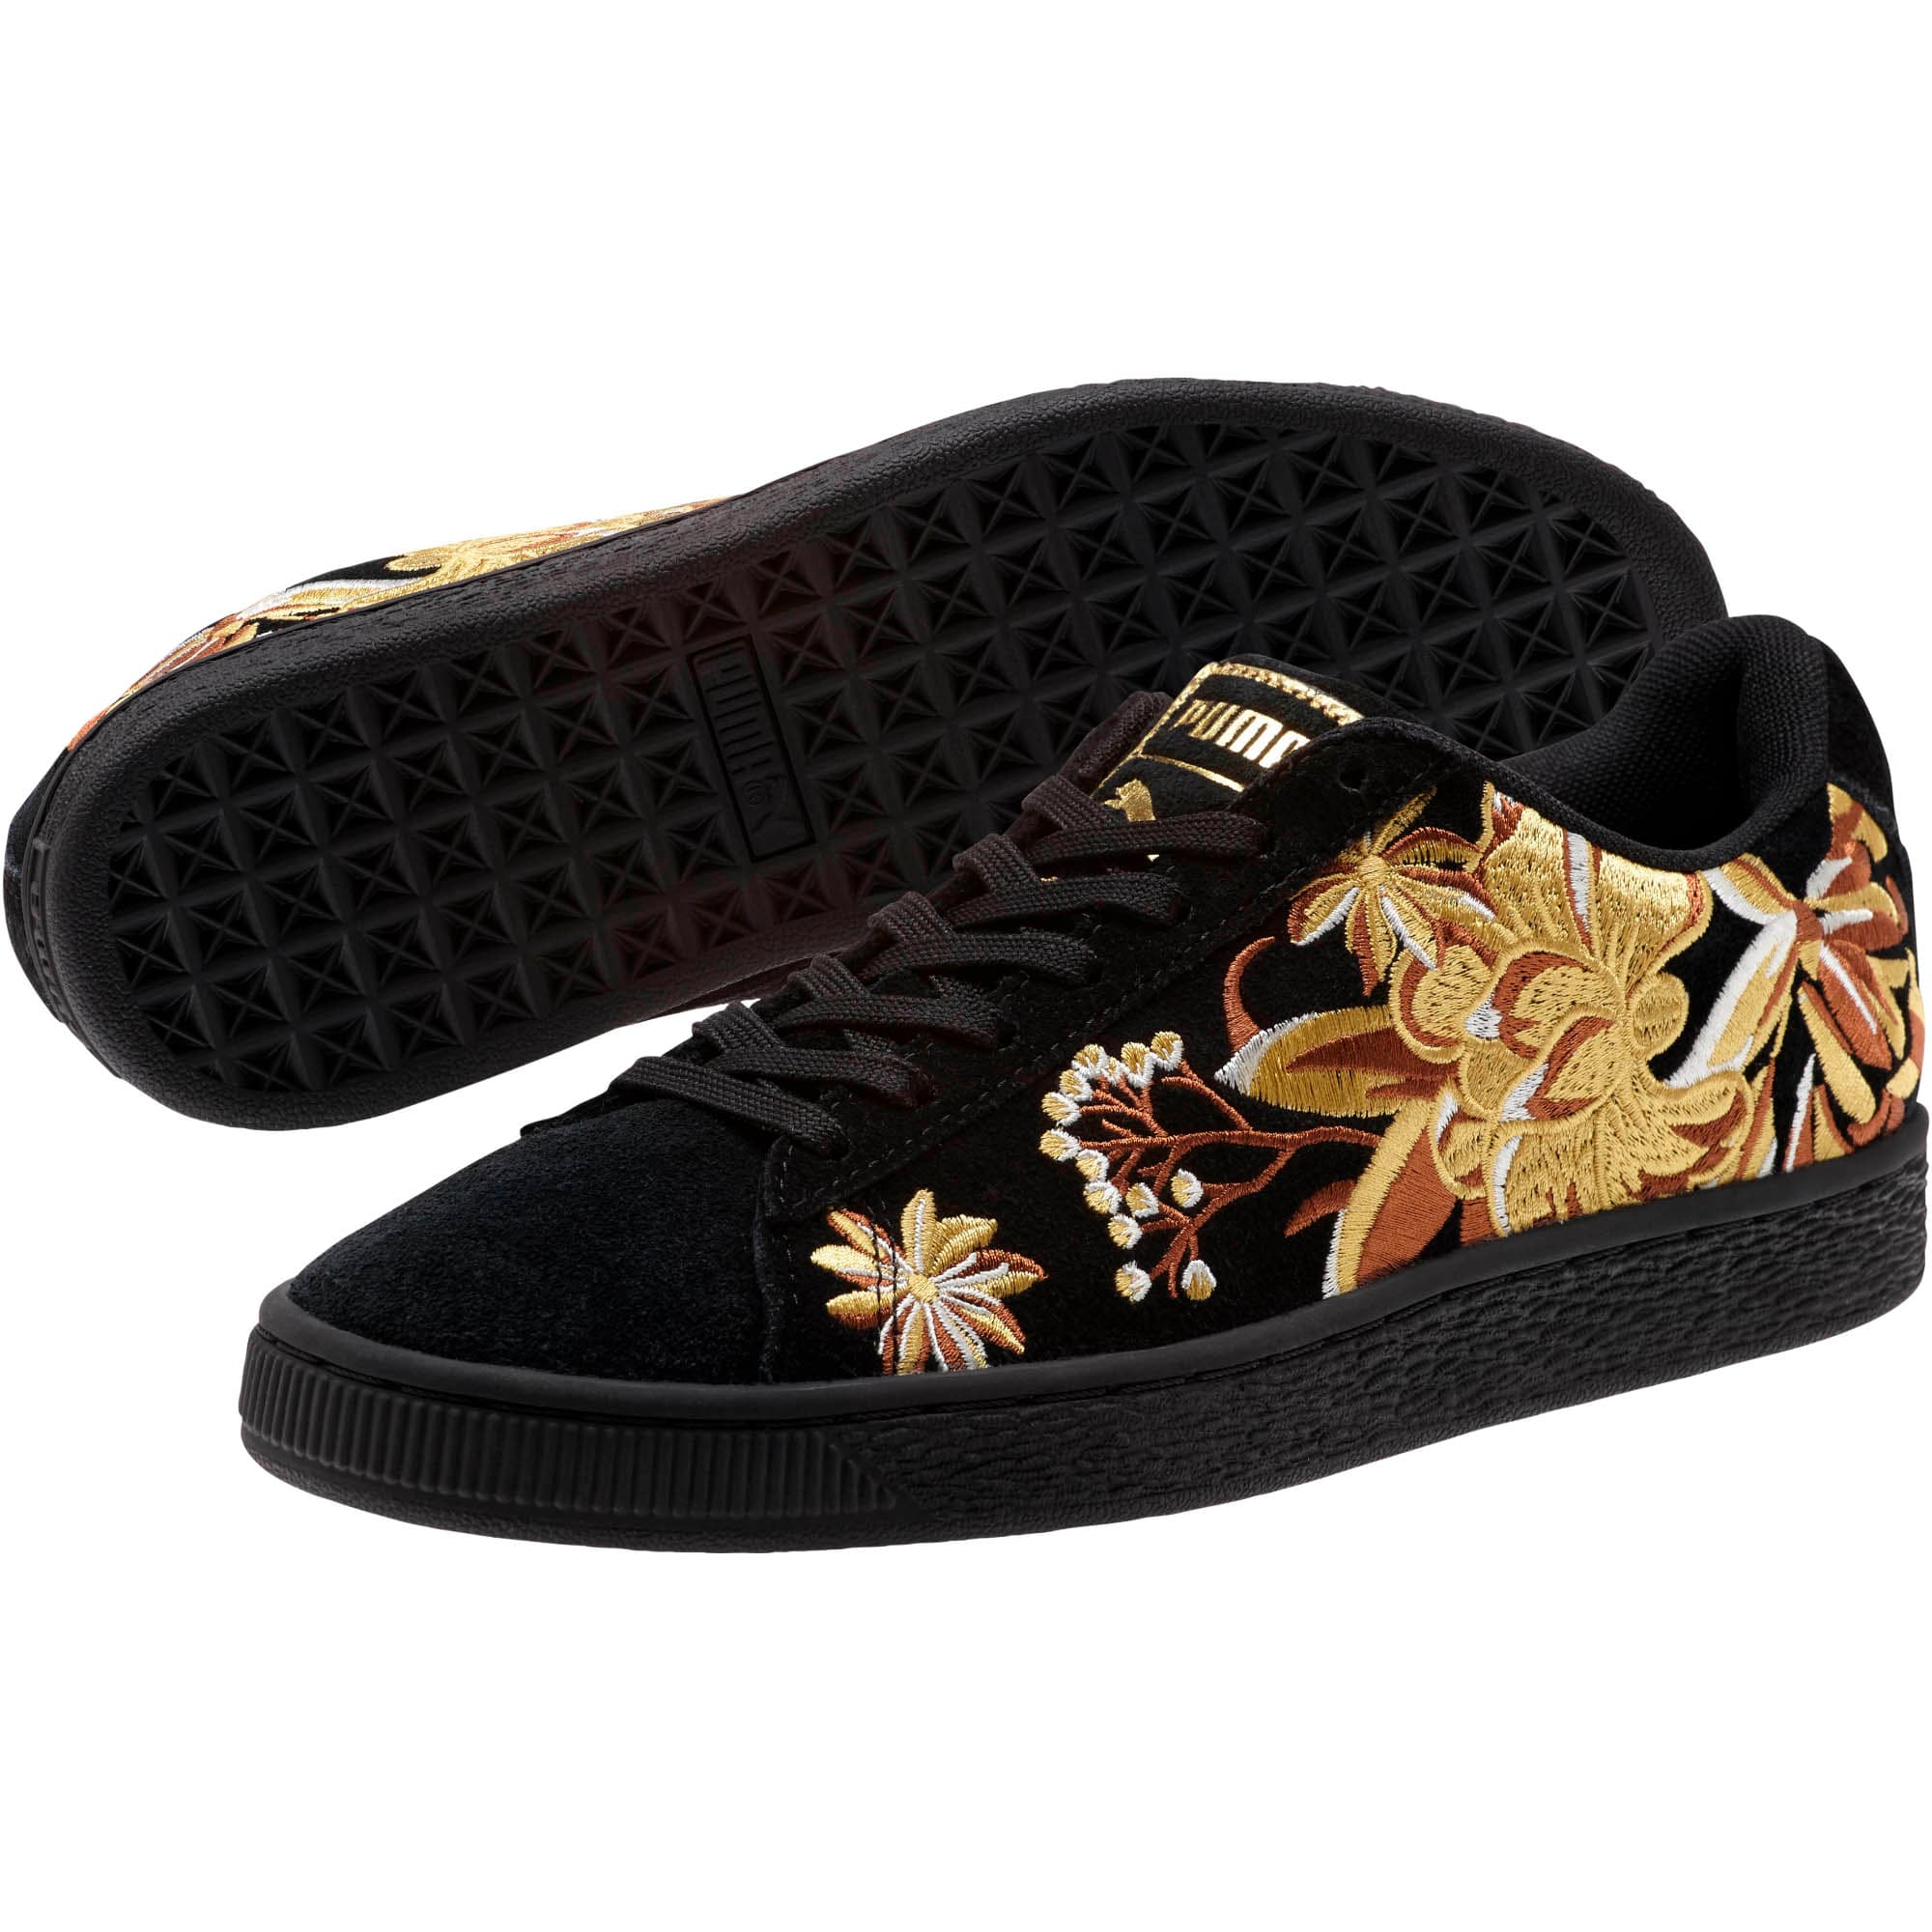 Suede Hyper Embroidered Women's 